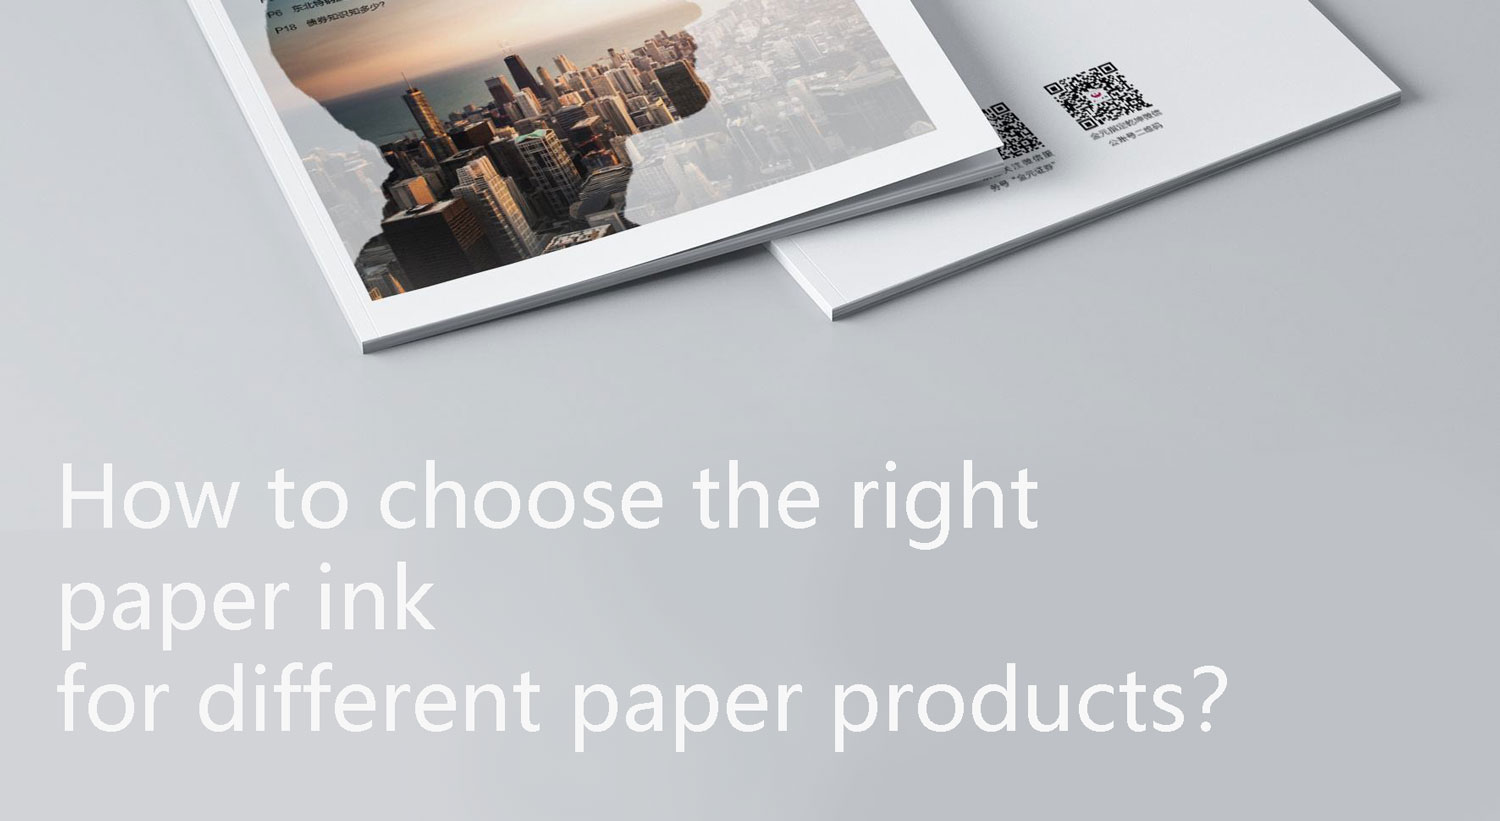 How to choose the right paper ink for different paper products？